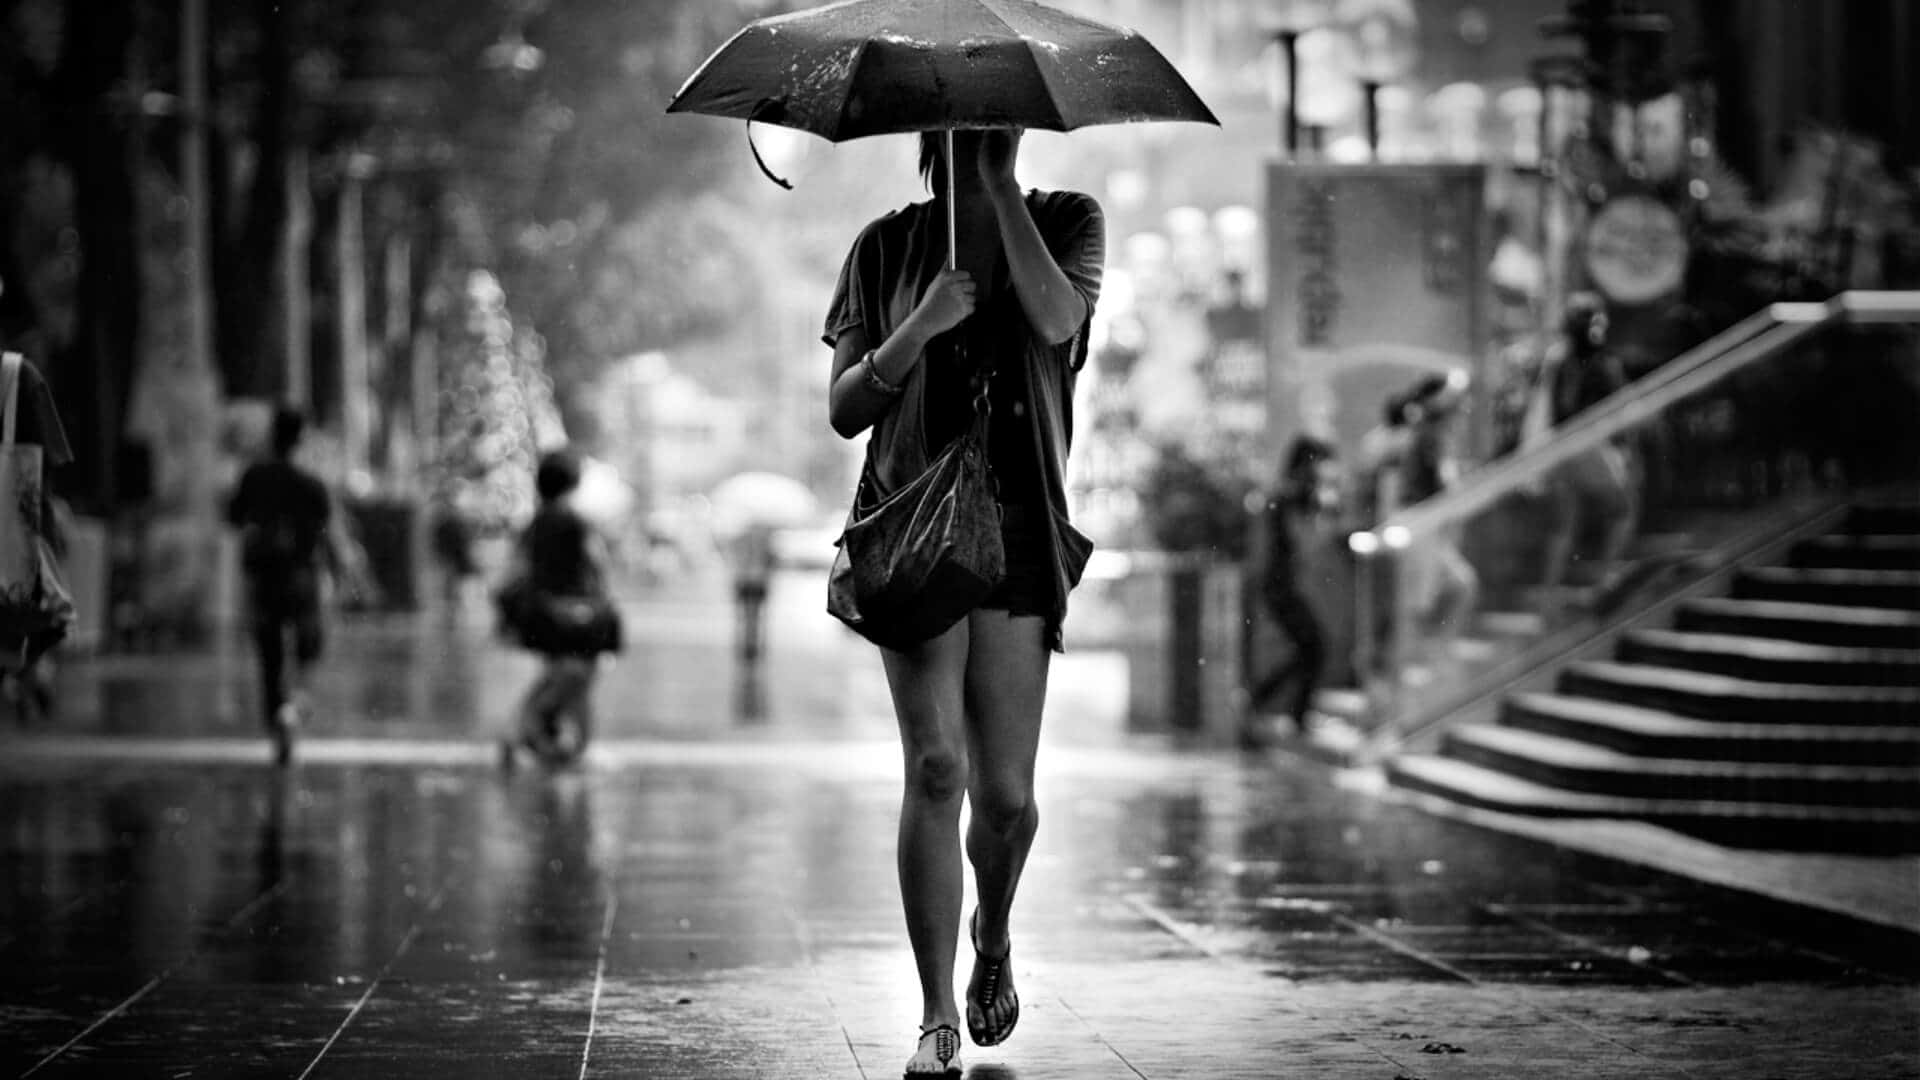 Woman With Umbrella On Rainy Day In Black And White Picture